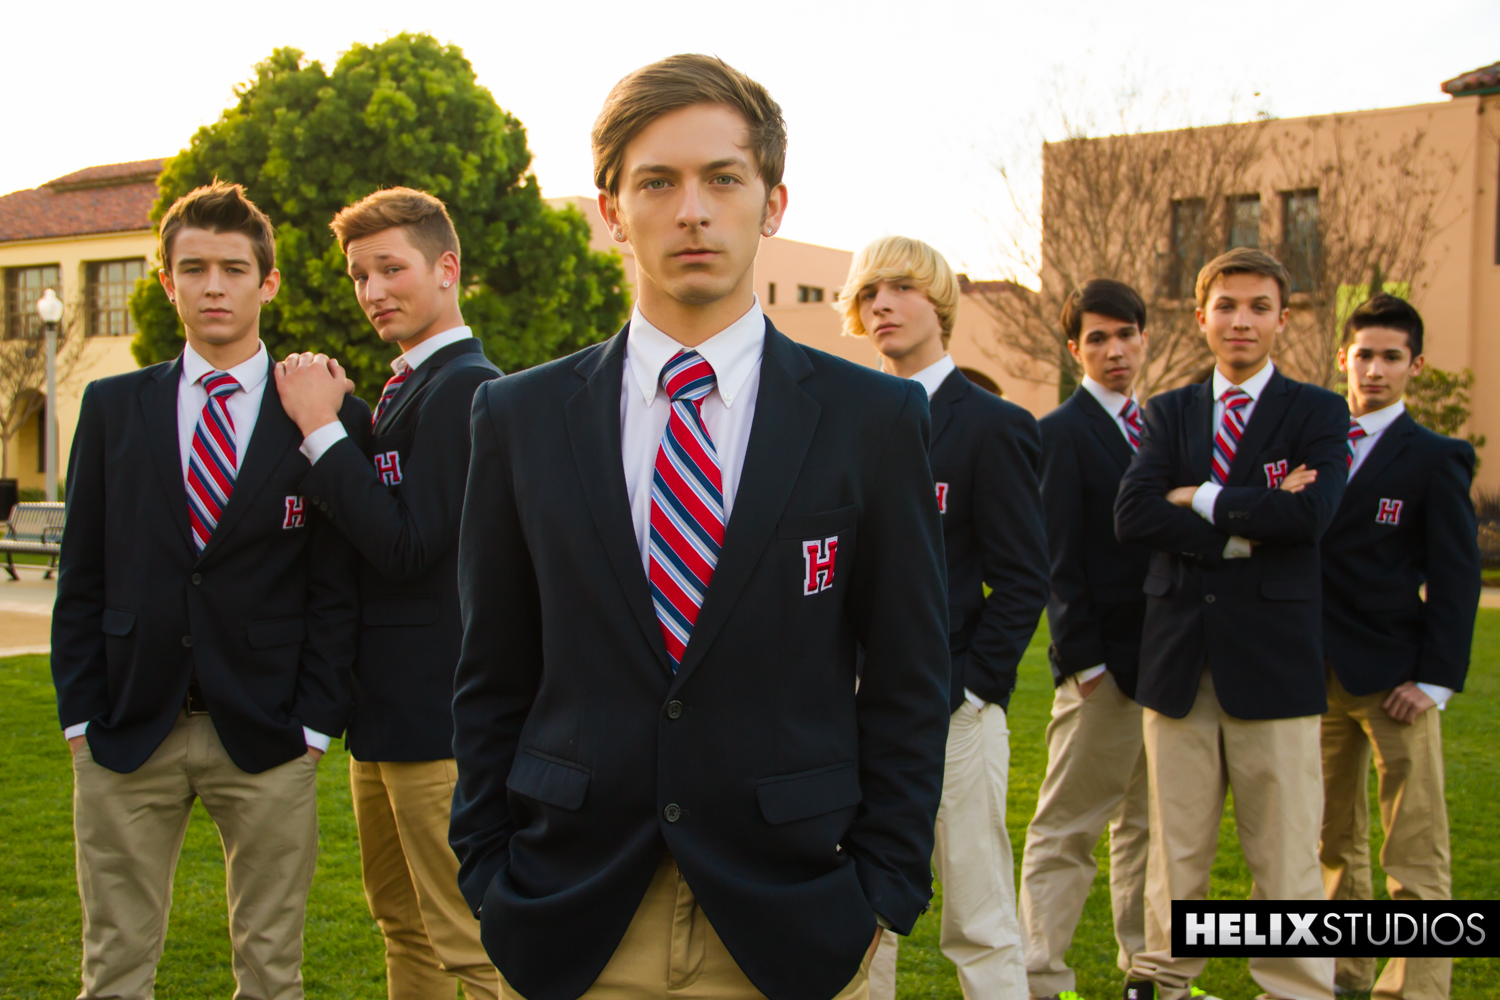 NEW RELEASE: Scandal at Helix Academy.